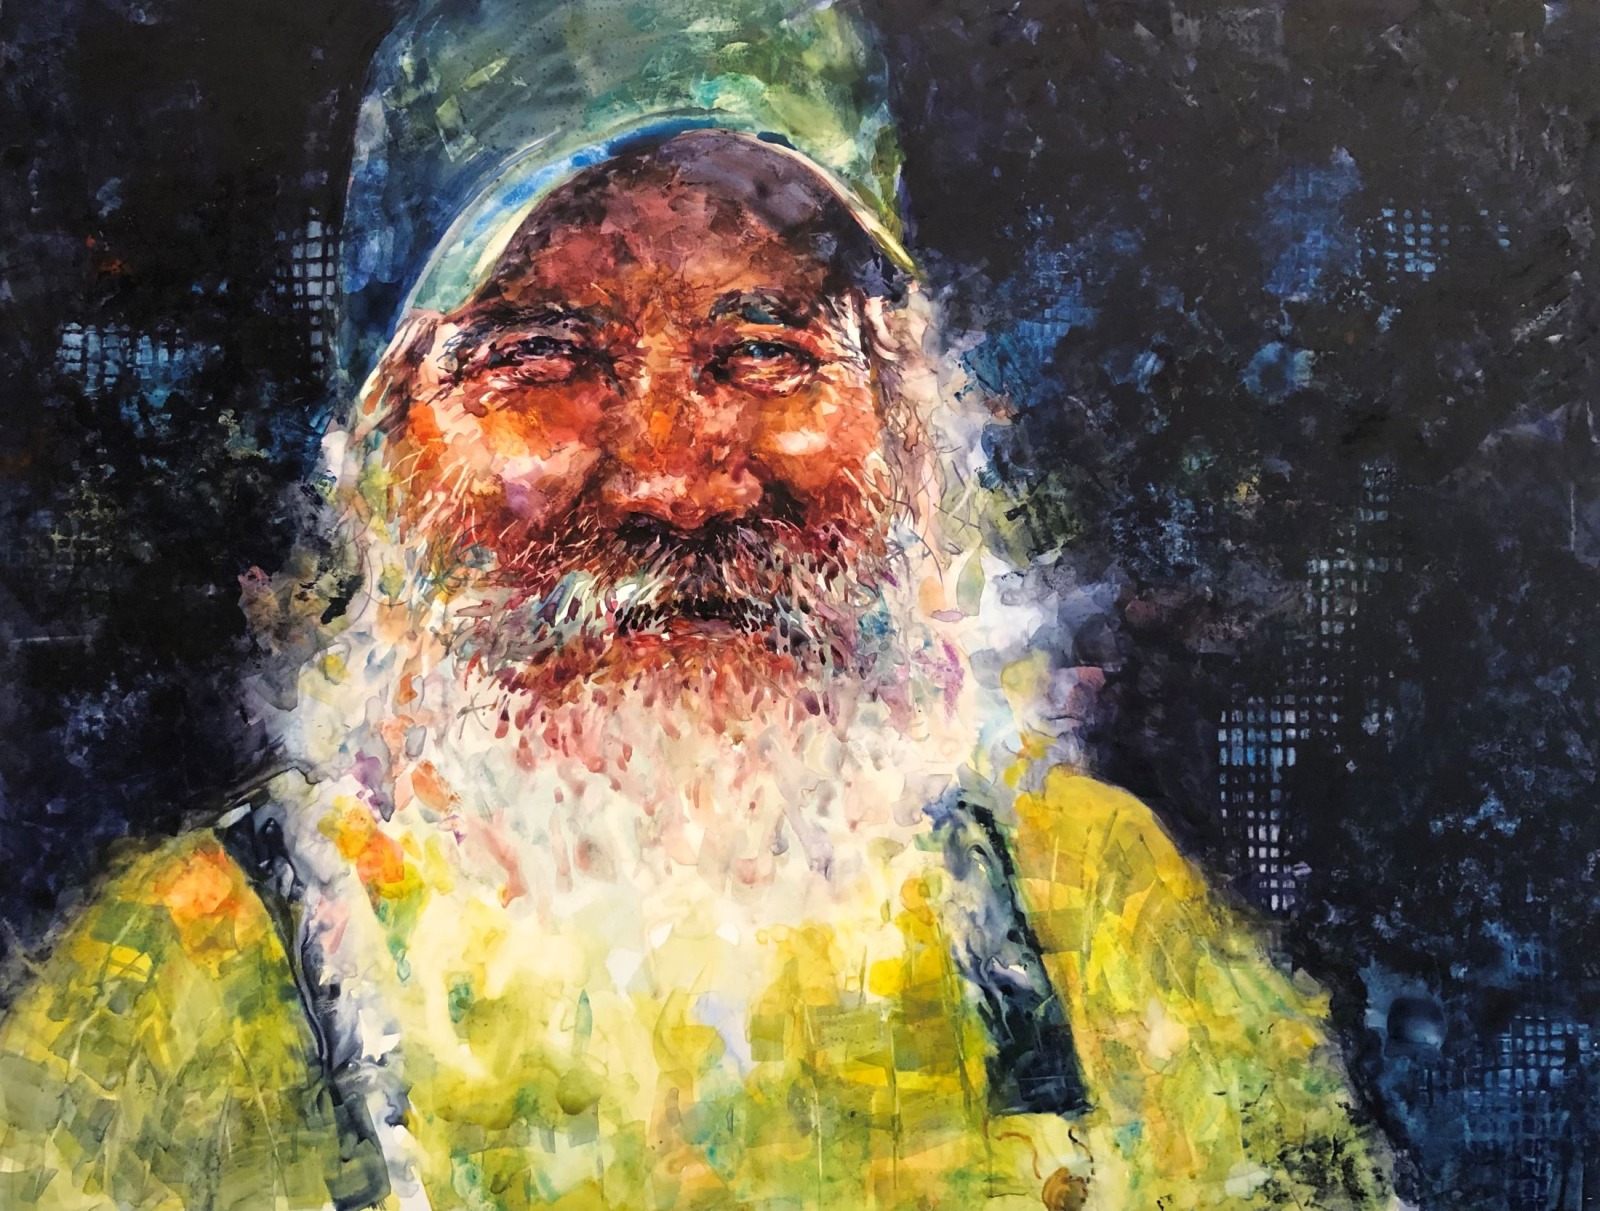 A painting of a man with a white beard wearing a blue hat and a bright yellow shirt.